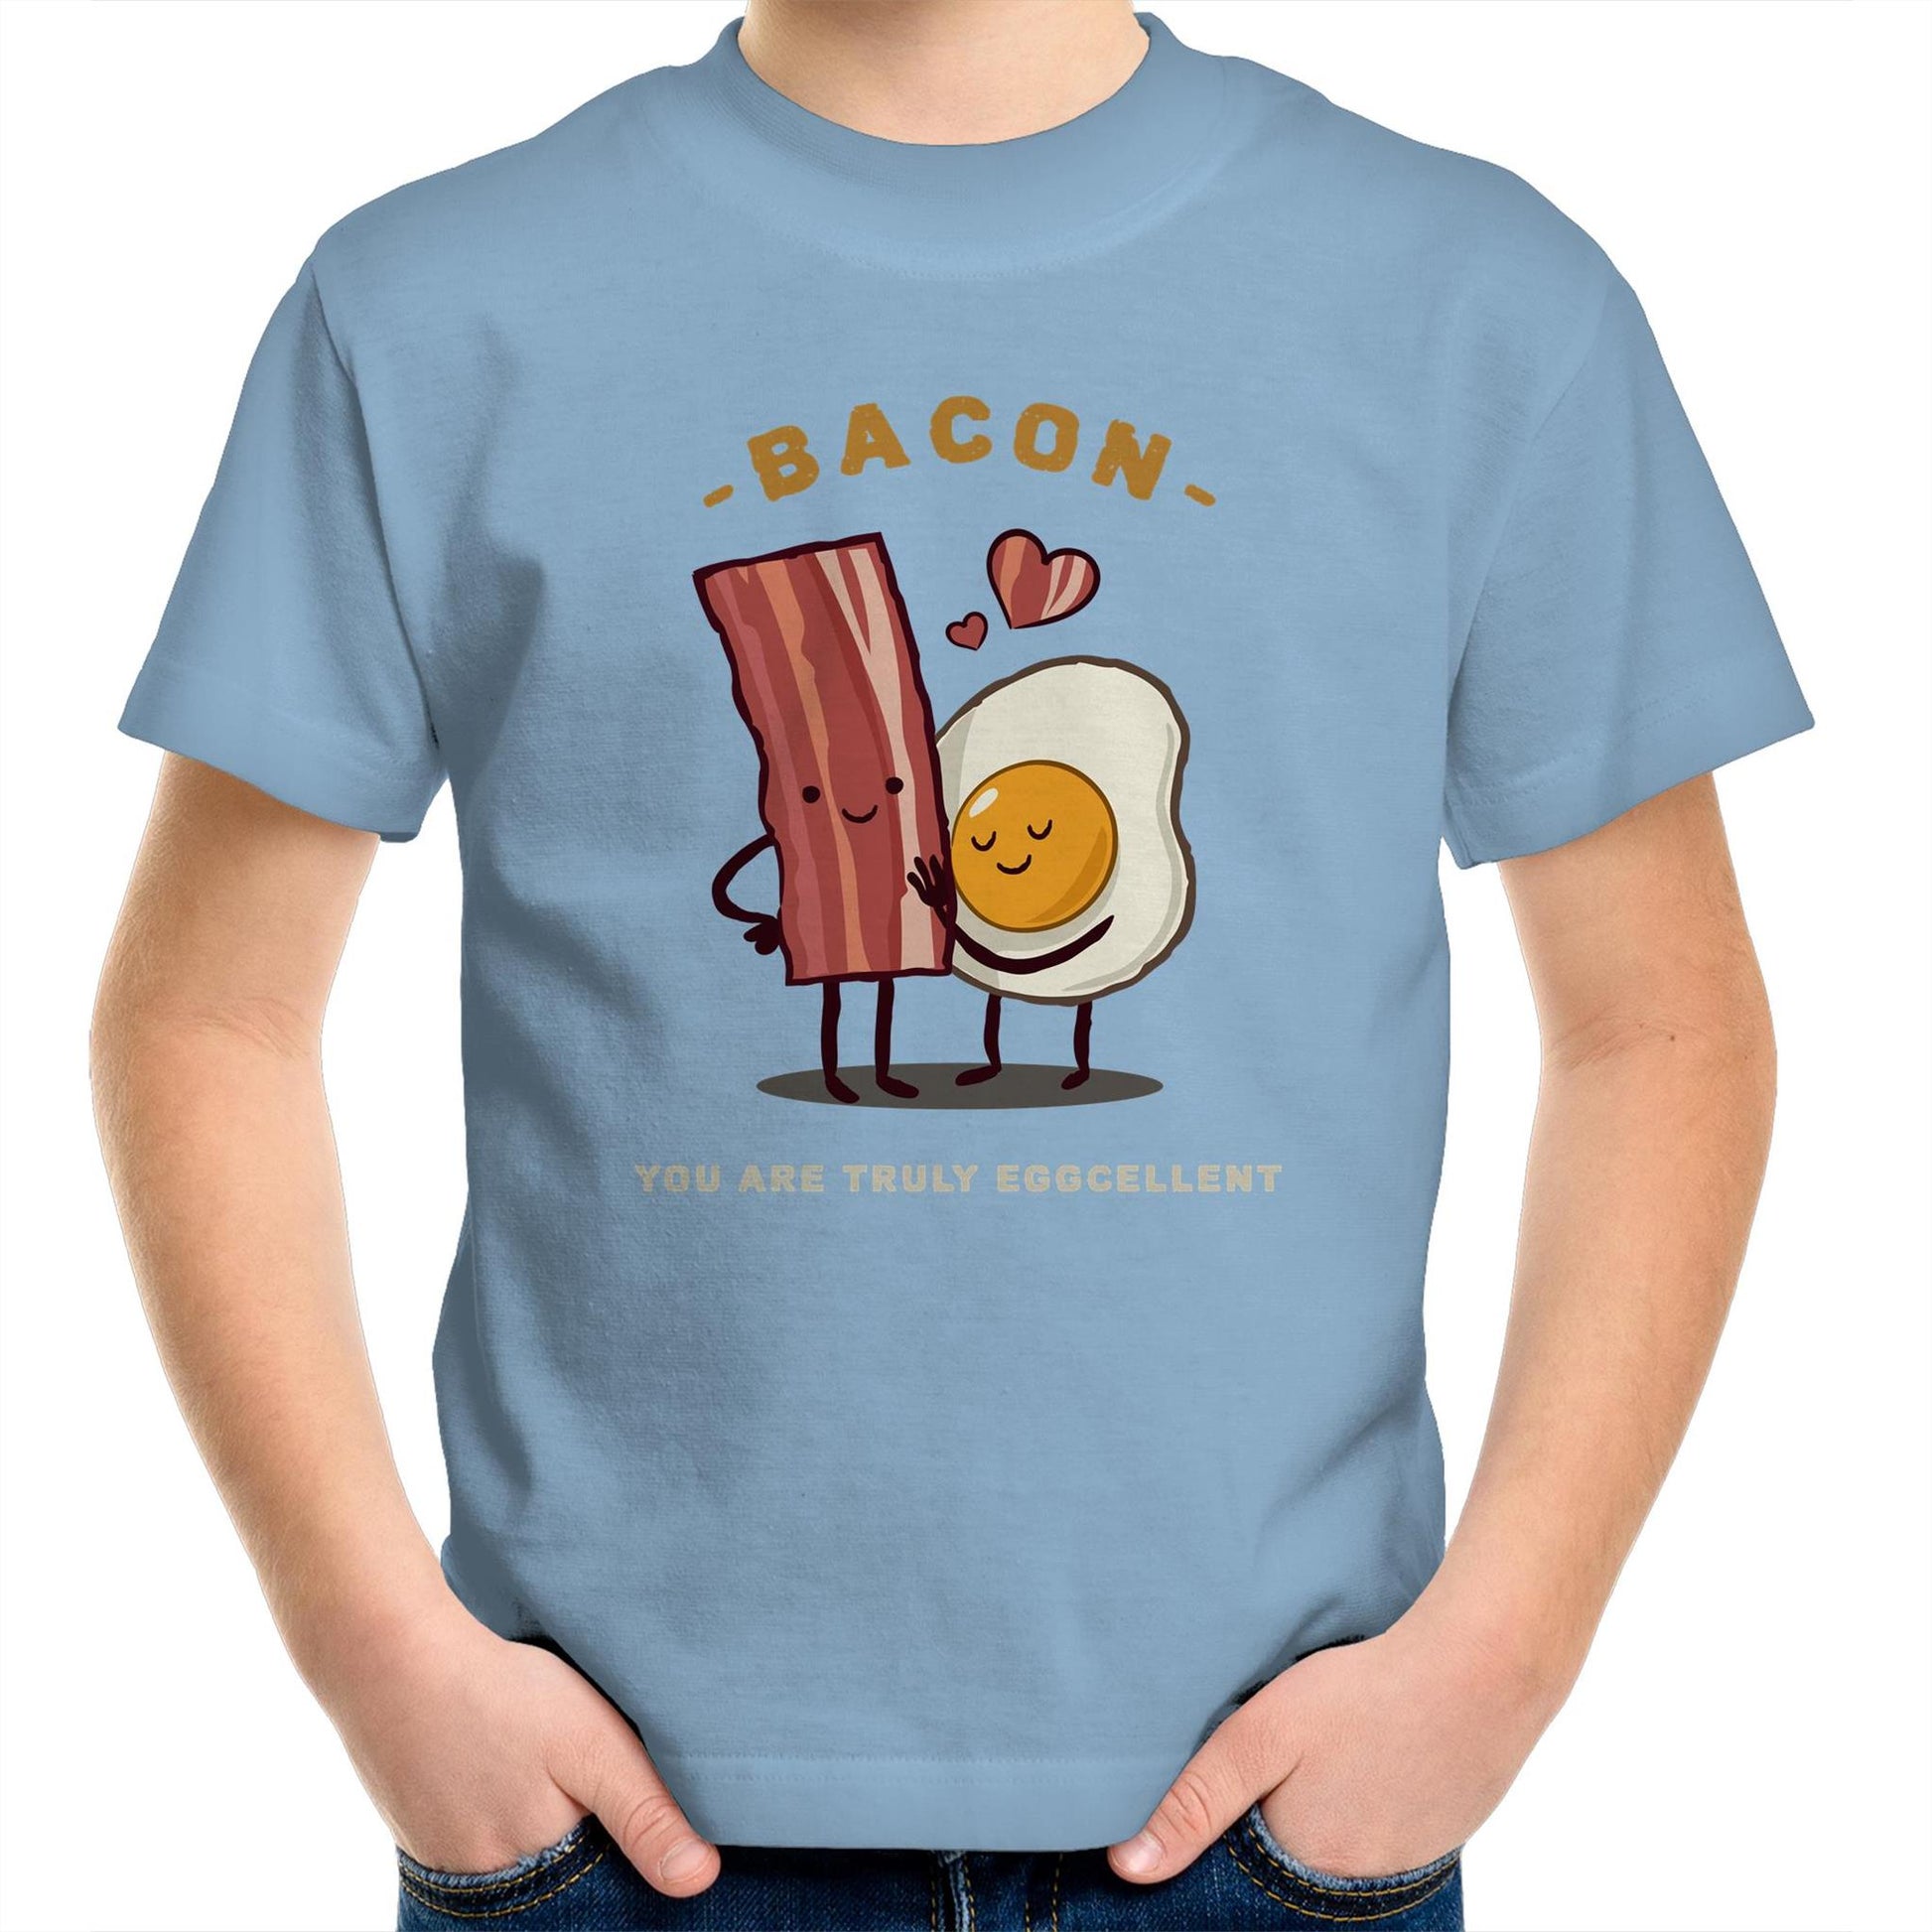 Bacon, You Are Truly Eggcellent - Kids Youth T-Shirt Carolina Blue Kids Youth T-shirt Food